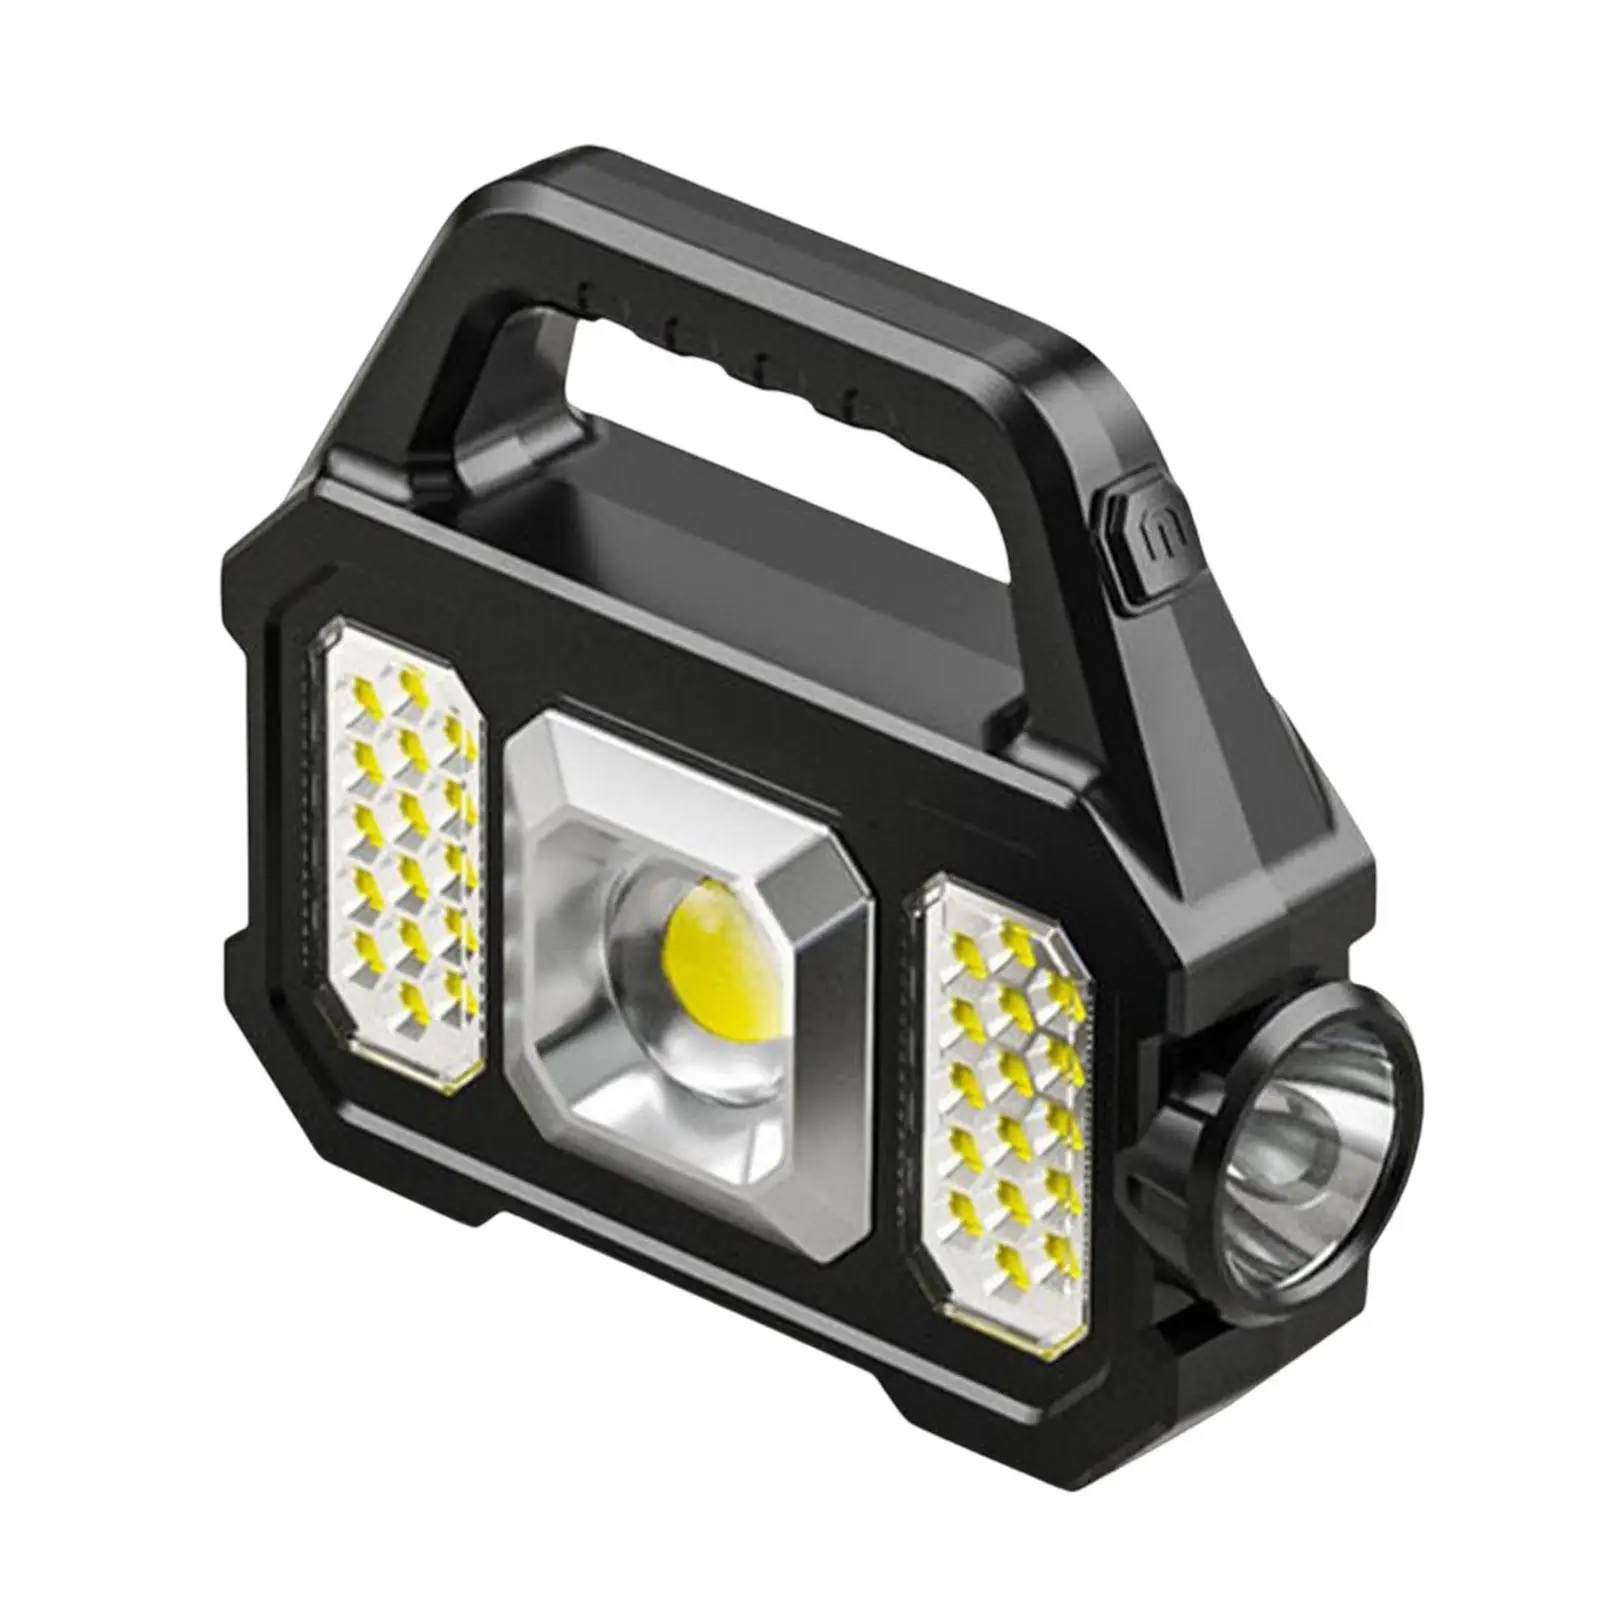 Portable Spot Light Searchlight Waterproof Lamp Rechargeable Work Light for Outdoor Indoor Emergencies Camping Fishing